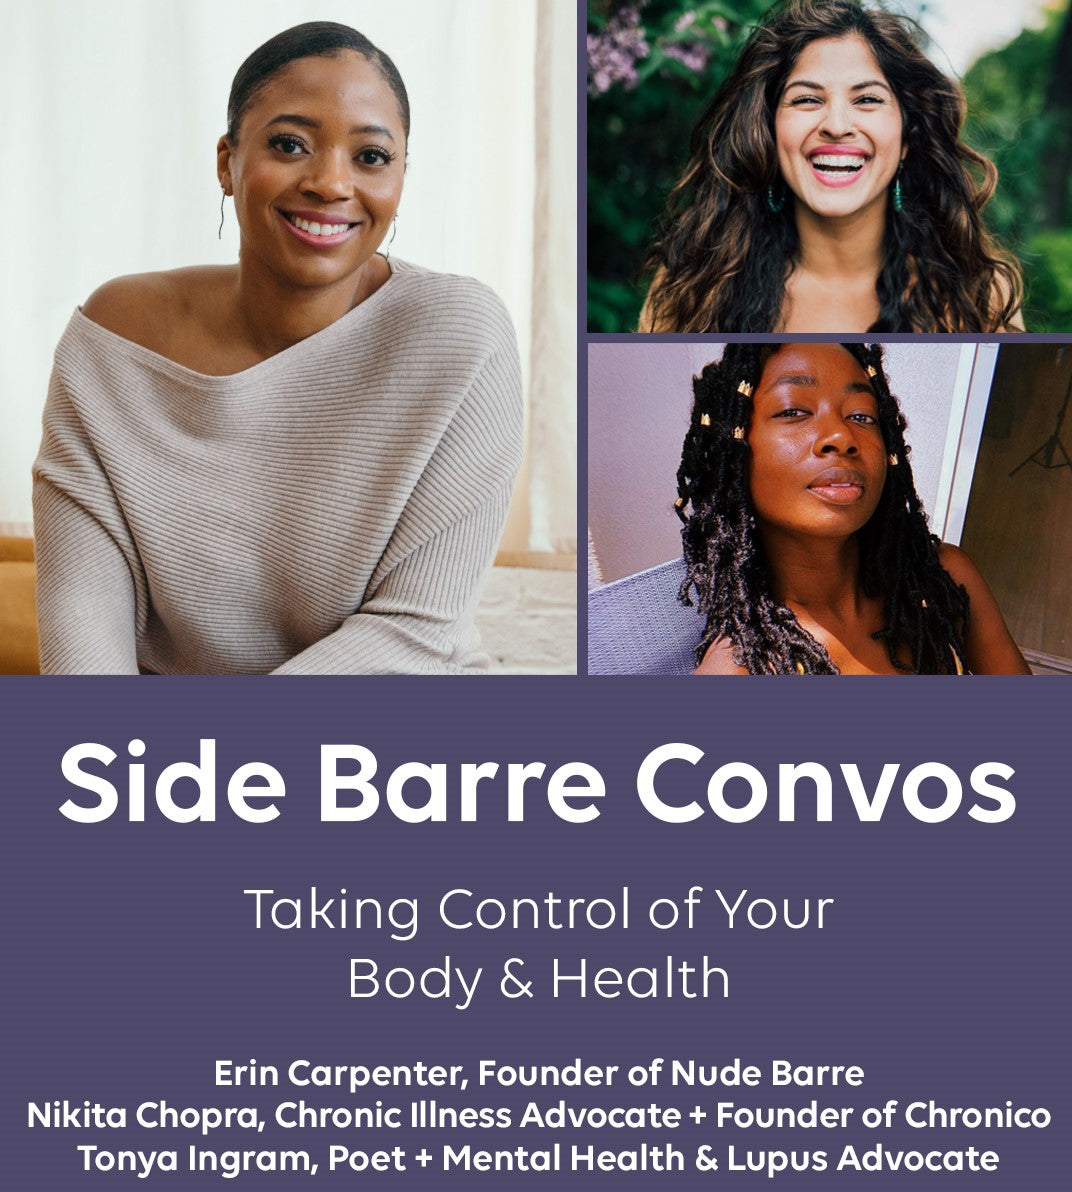 SIDE BARRE Convos | Taking Control of Your Body & Health